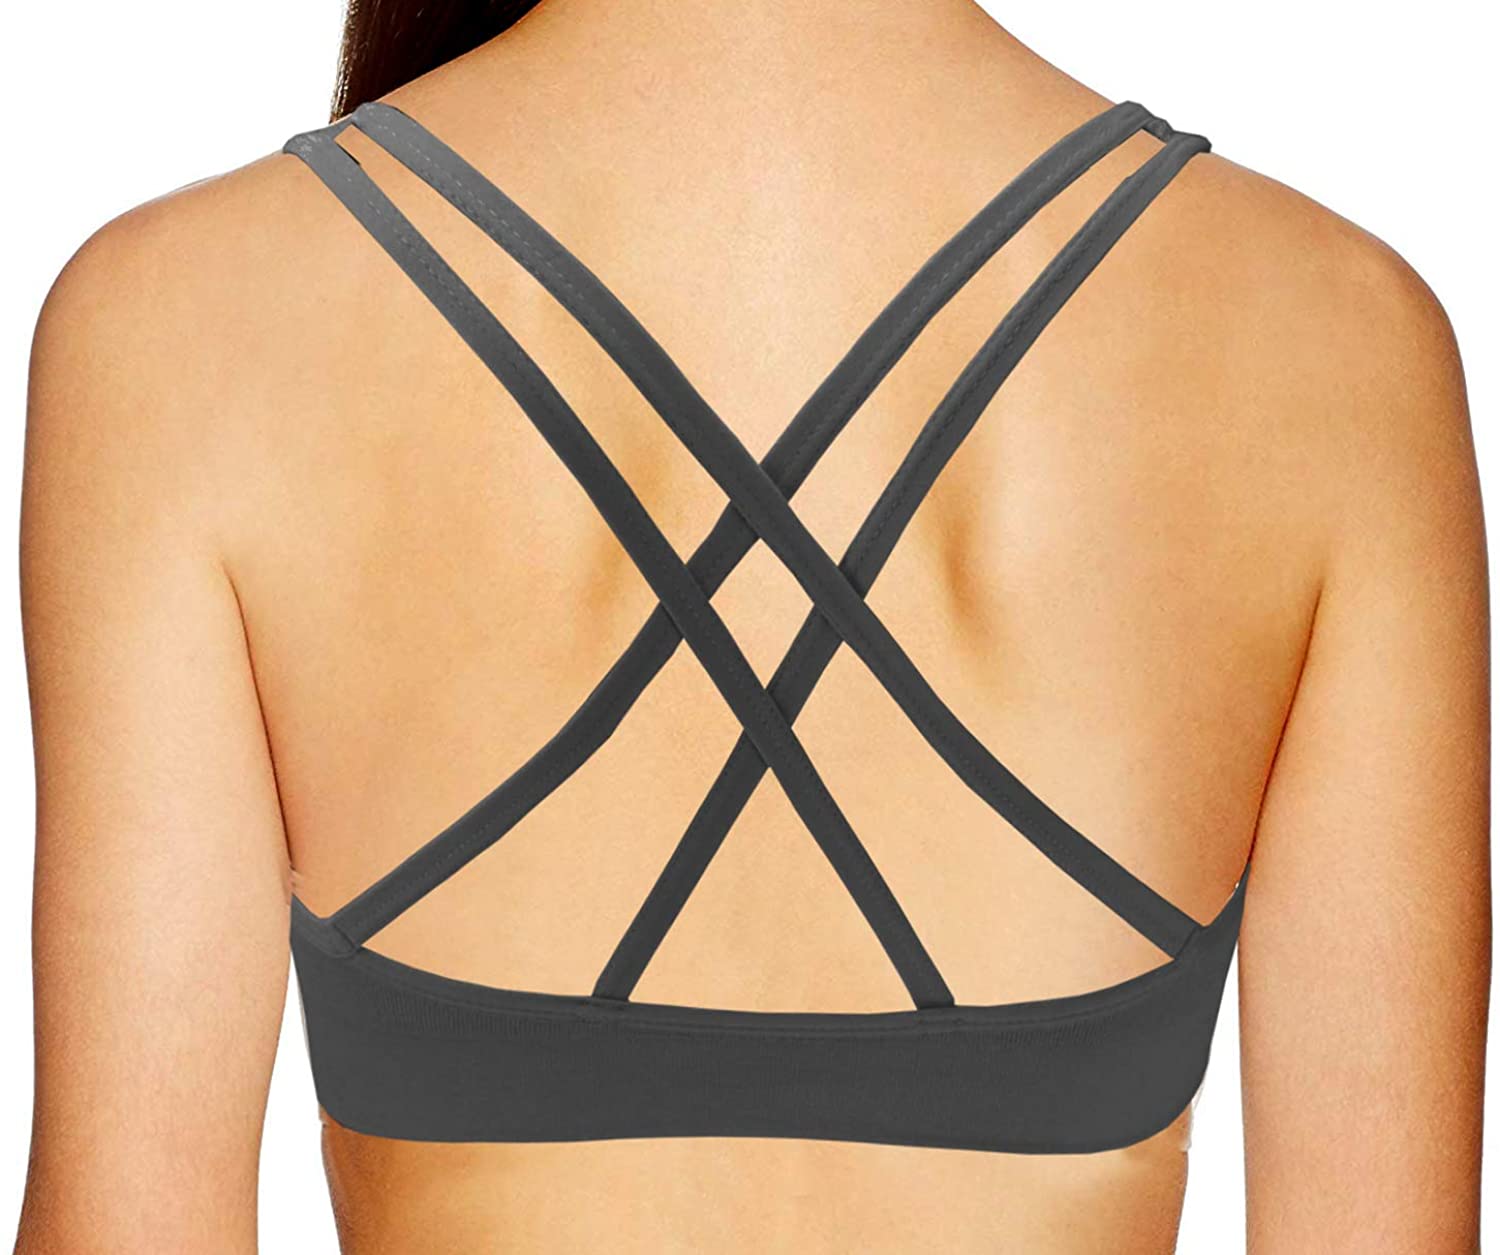 Akamc 3 Pack Womens Medium Support Cross Back Wirefree Removable Cups Yoga Spor Ebay 